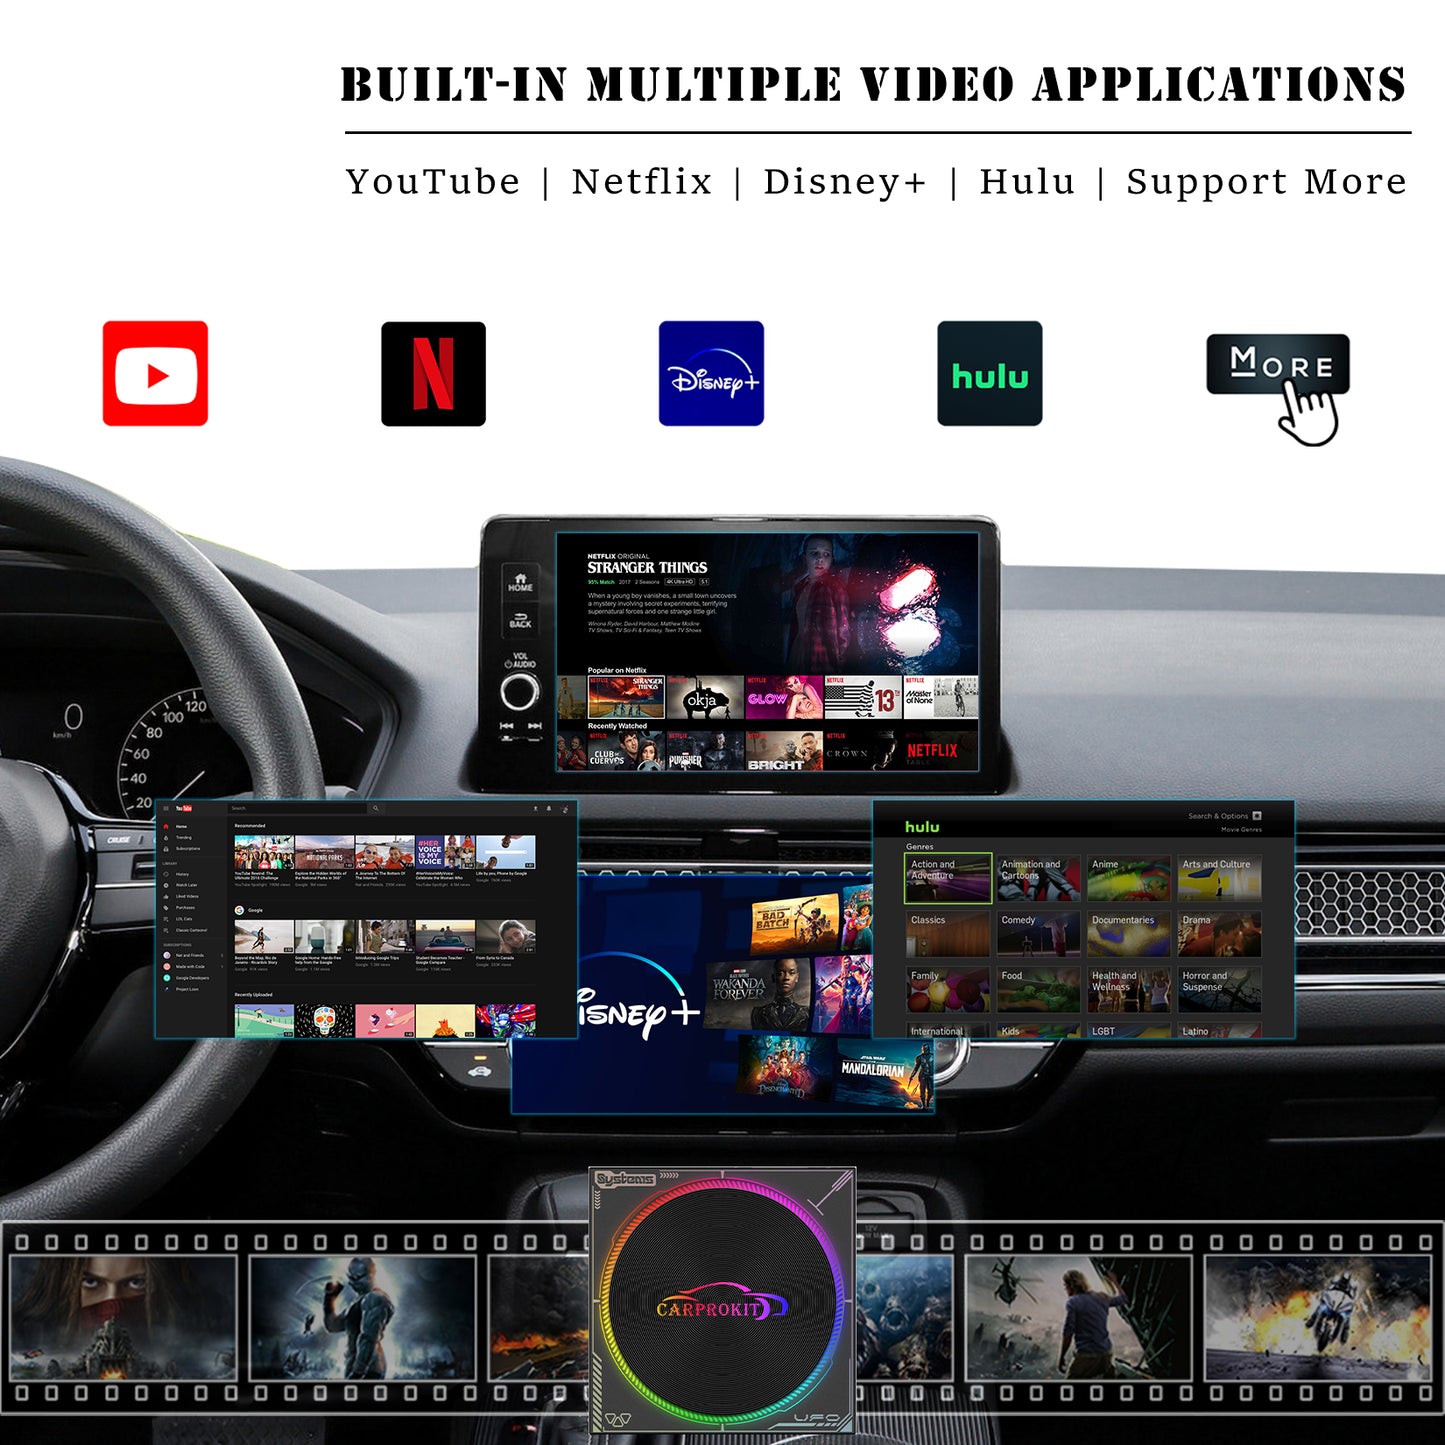 5IN1 Wireless Apple CarPlay Android Auto Adapter Car Screen Mirroring Android 13.0 AI Box Built-in YouTube Netflix Hulu Disney+ QCM6225 8GB+128GB